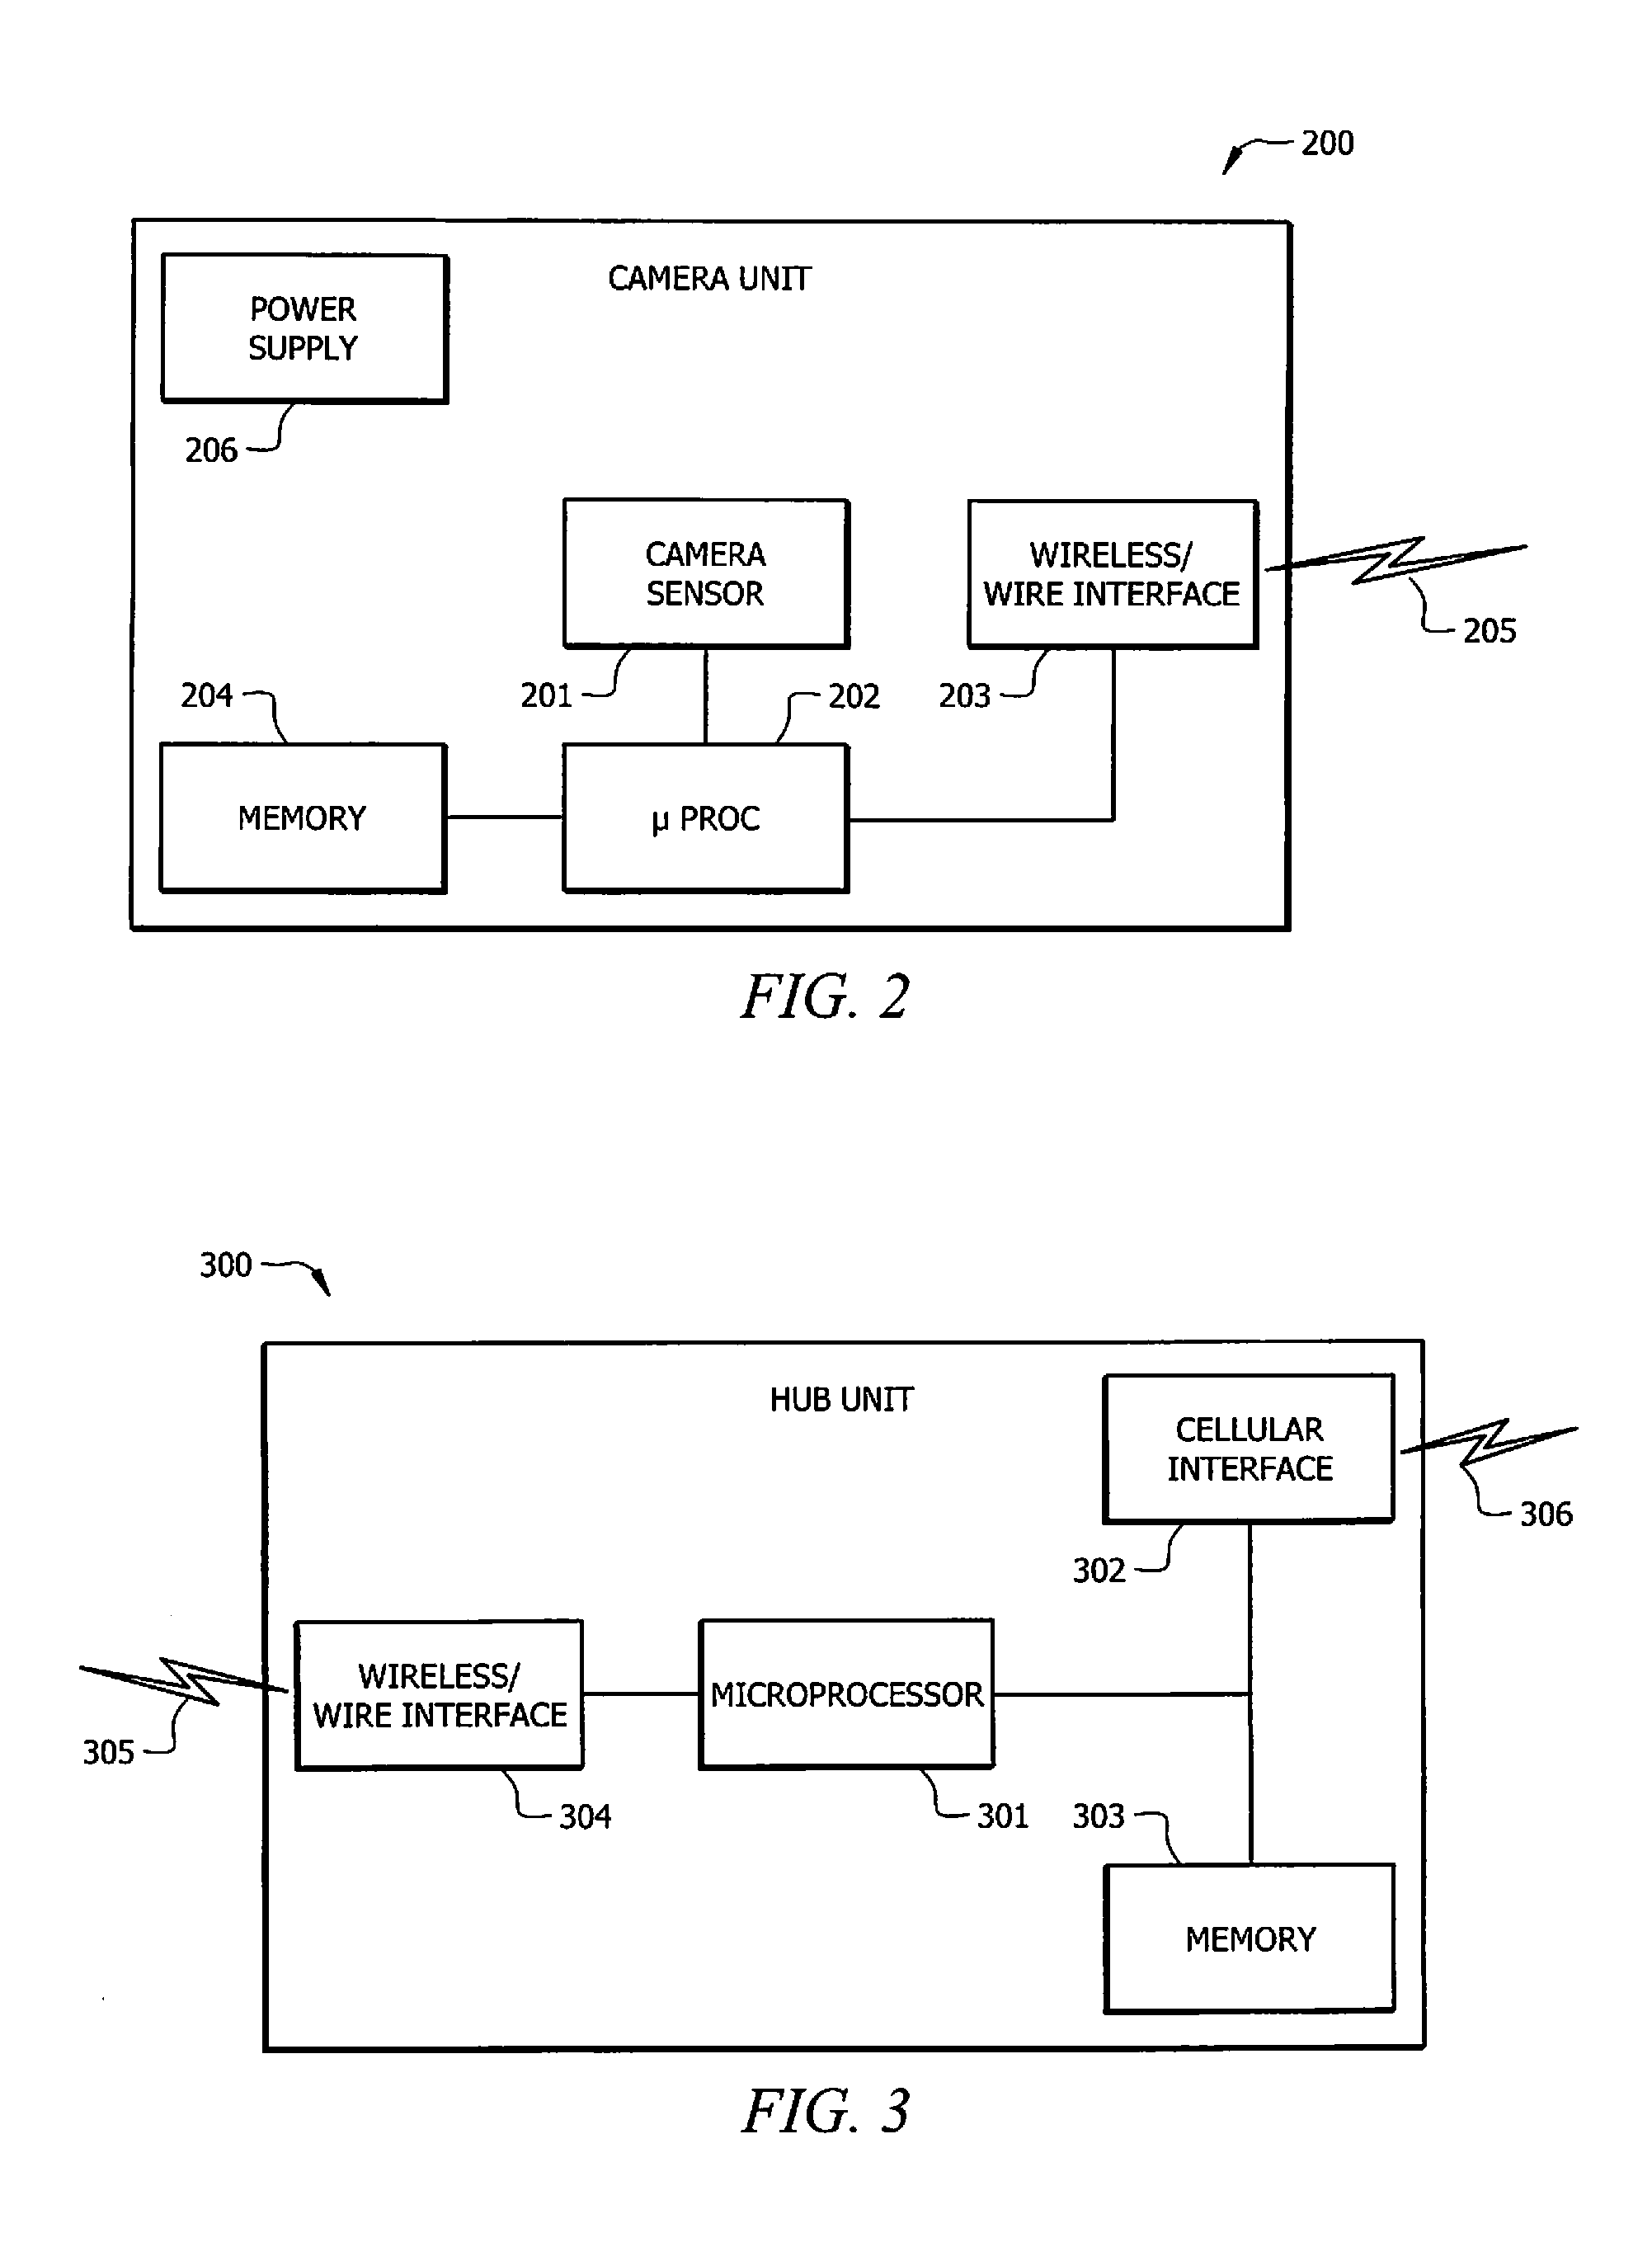 System and Method of On-Shelf Inventory Management